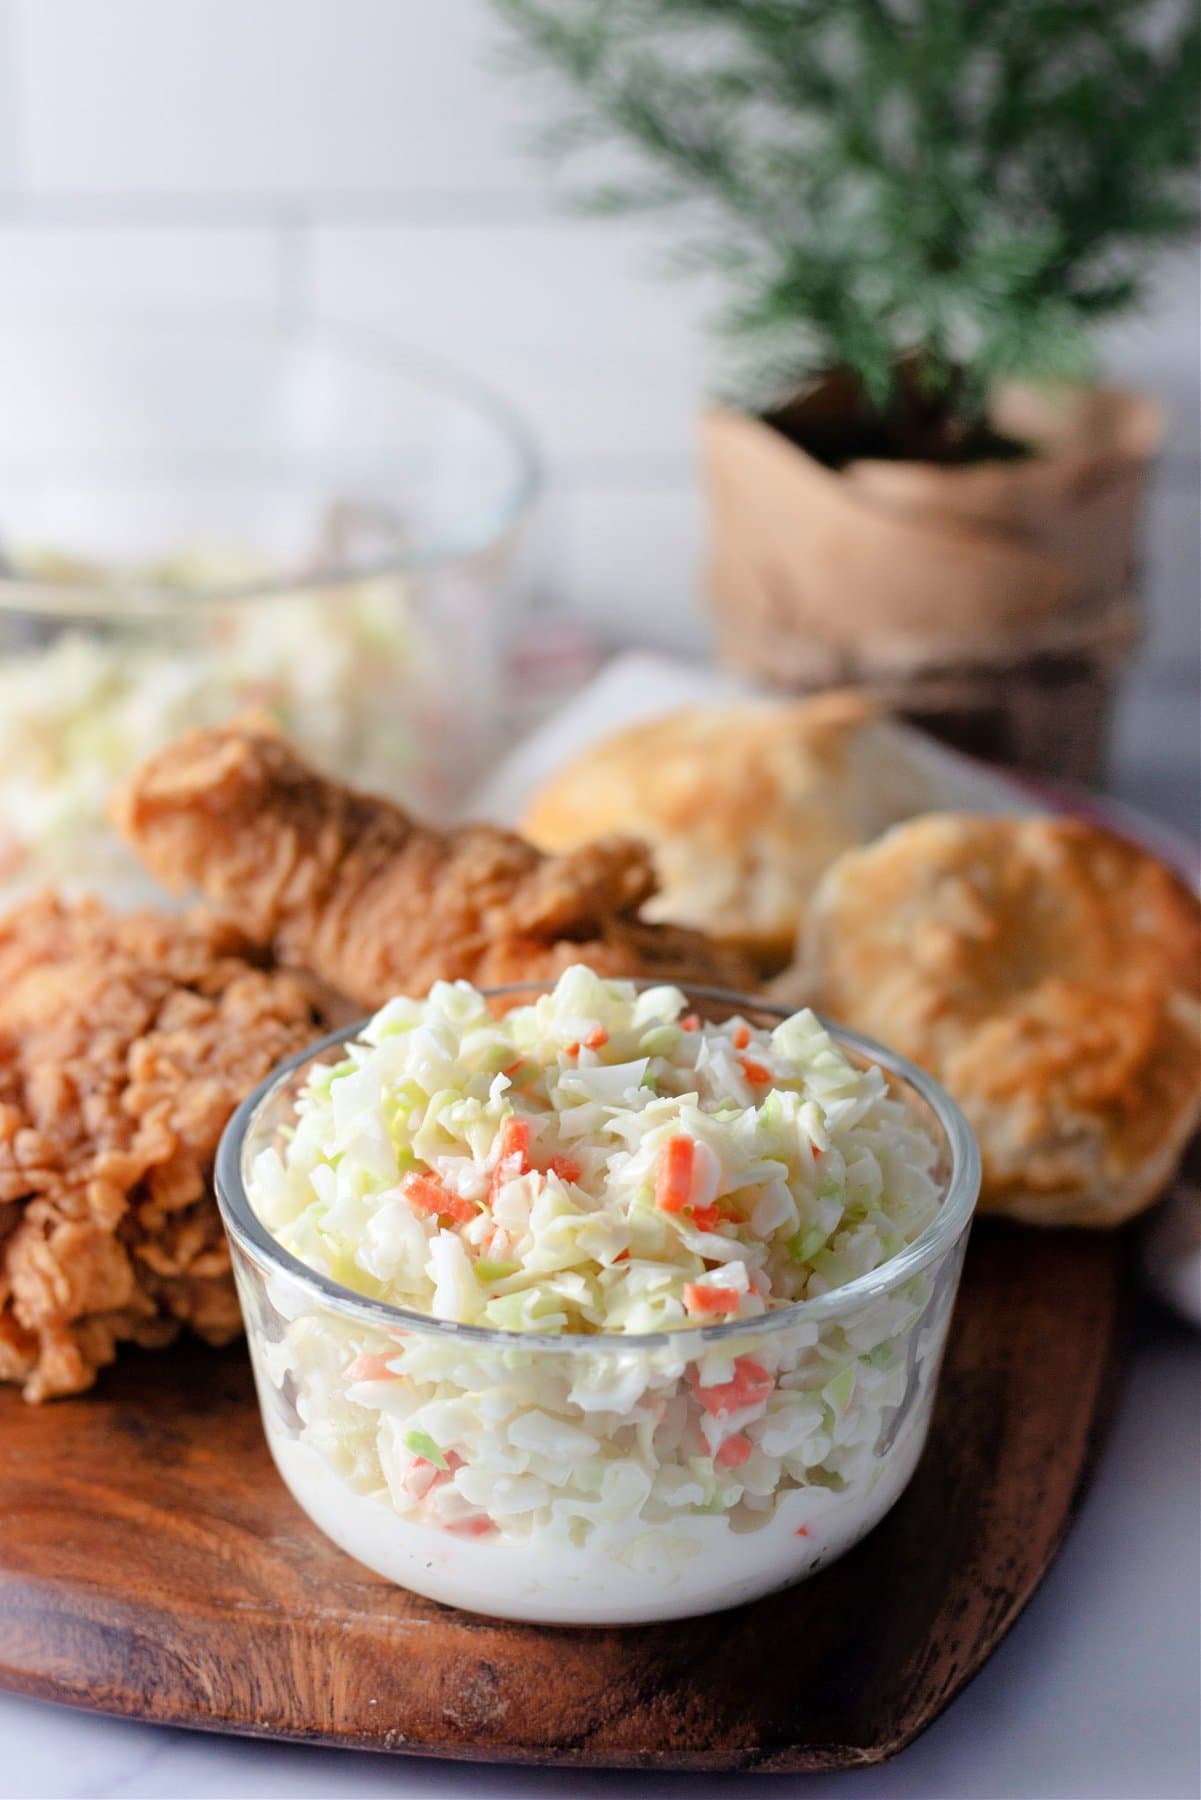 KFC Coleslaw in a dish in front of fried chicken and biscuits